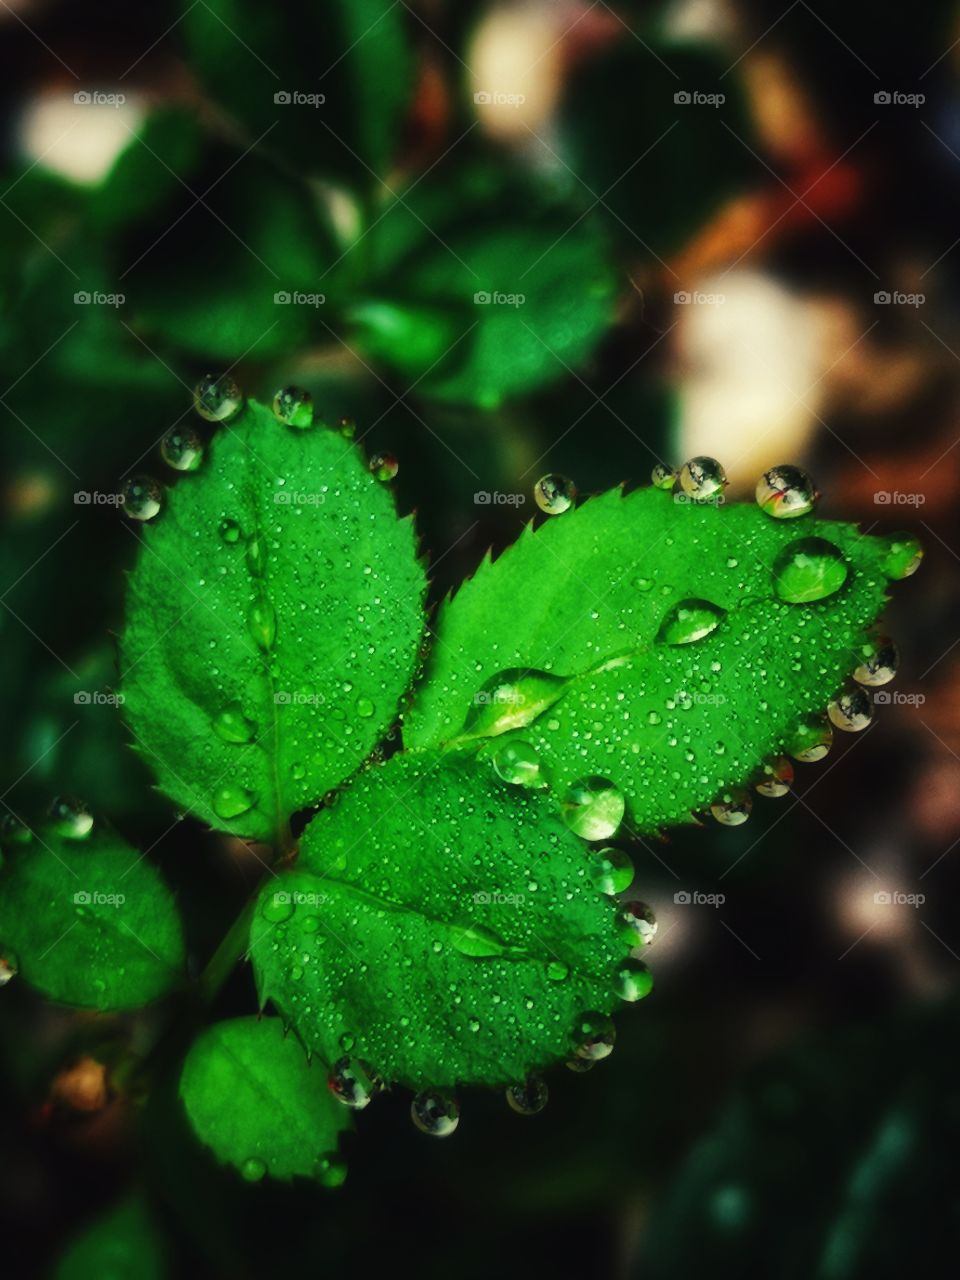 Rainy drops on the green leafs